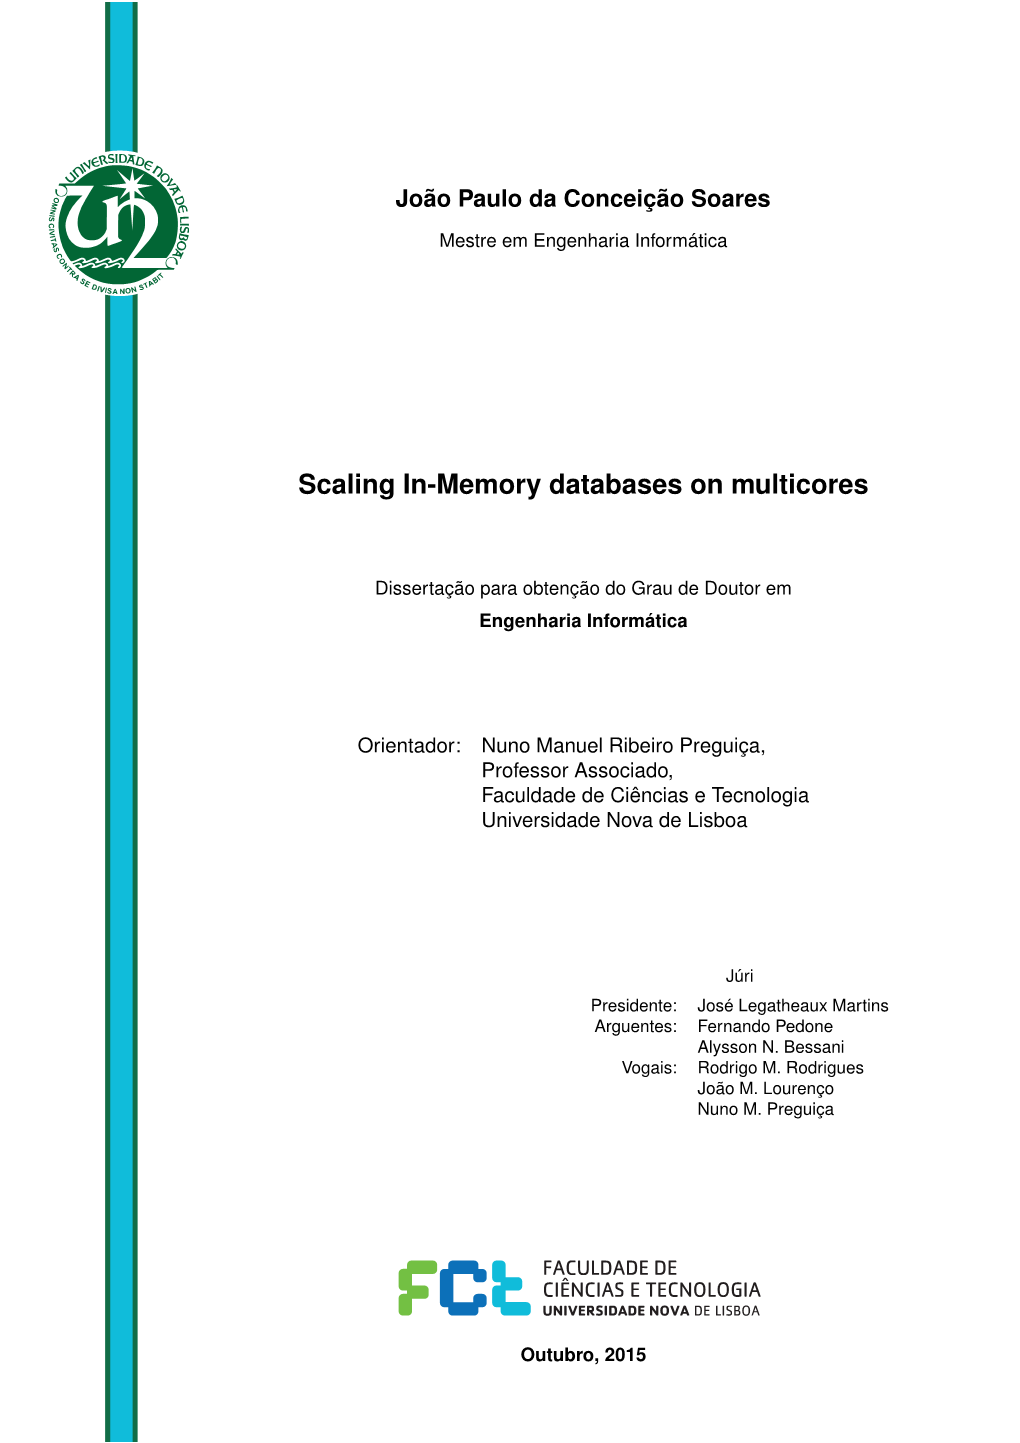 Scaling In-Memory Databases on Multicores